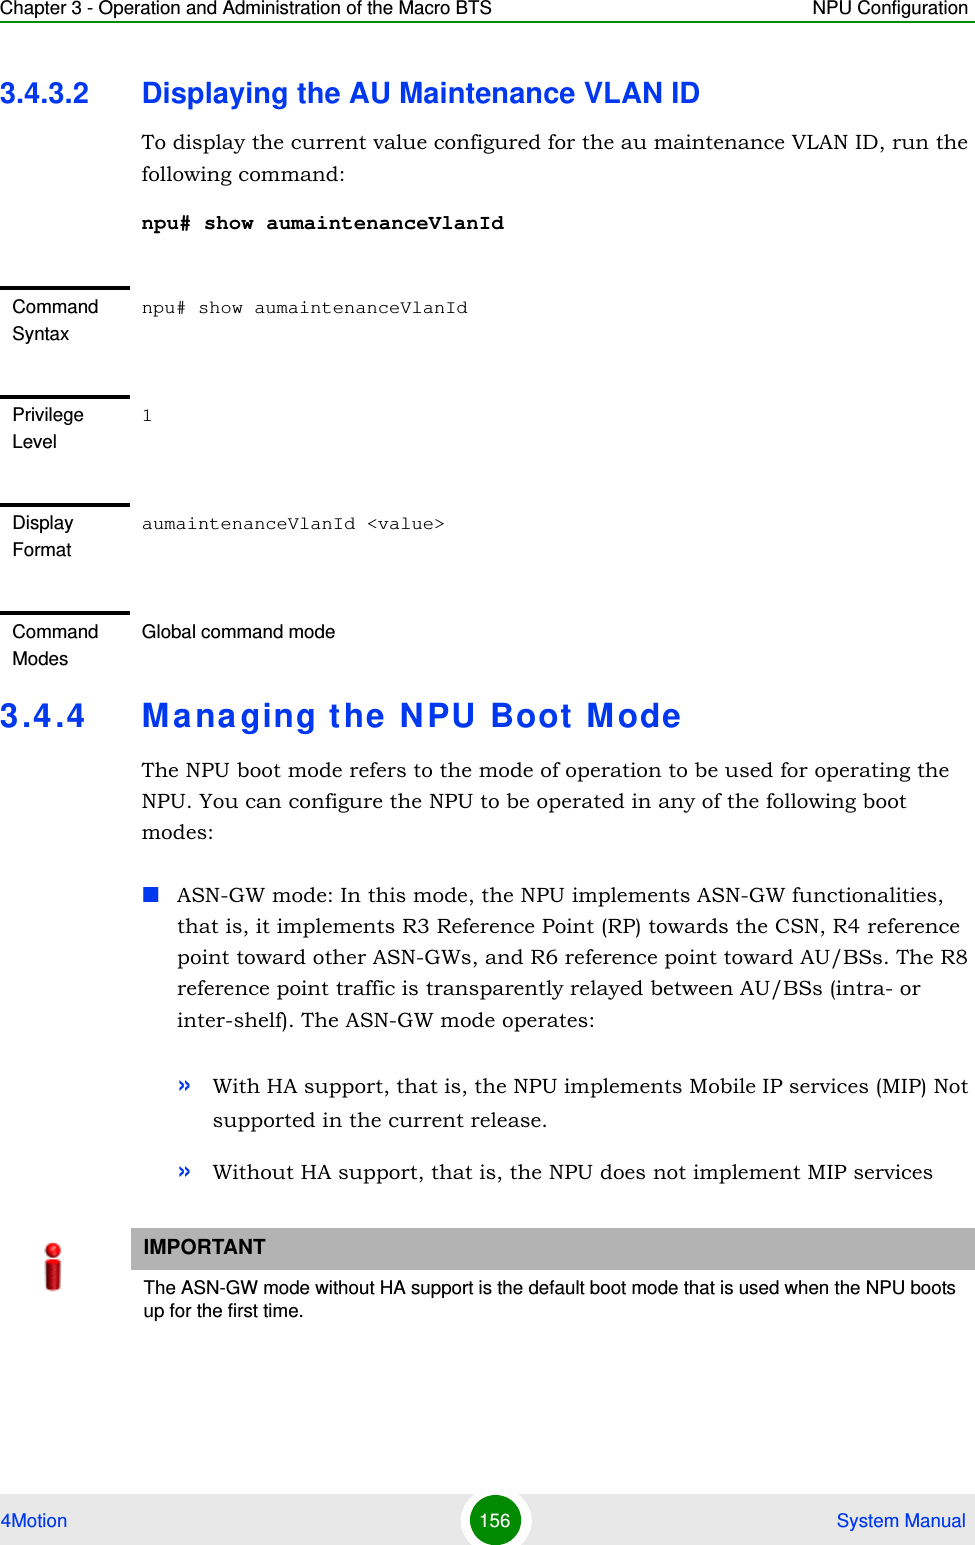 Chapter 3 - Operation and Administration of the Macro BTS NPU Configuration4Motion 156  System Manual3.4.3.2 Displaying the AU Maintenance VLAN IDTo display the current value configured for the au maintenance VLAN ID, run the following command:npu# show aumaintenanceVlanId3.4.4 Managing the NPU Boot ModeThe NPU boot mode refers to the mode of operation to be used for operating the NPU. You can configure the NPU to be operated in any of the following boot modes:ASN-GW mode: In this mode, the NPU implements ASN-GW functionalities, that is, it implements R3 Reference Point (RP) towards the CSN, R4 reference point toward other ASN-GWs, and R6 reference point toward AU/BSs. The R8 reference point traffic is transparently relayed between AU/BSs (intra- or inter-shelf). The ASN-GW mode operates:»With HA support, that is, the NPU implements Mobile IP services (MIP) Not supported in the current release.»Without HA support, that is, the NPU does not implement MIP servicesCommand Syntaxnpu# show aumaintenanceVlanIdPrivilege Level1Display FormataumaintenanceVlanId &lt;value&gt; Command ModesGlobal command modeIMPORTANTThe ASN-GW mode without HA support is the default boot mode that is used when the NPU boots up for the first time.